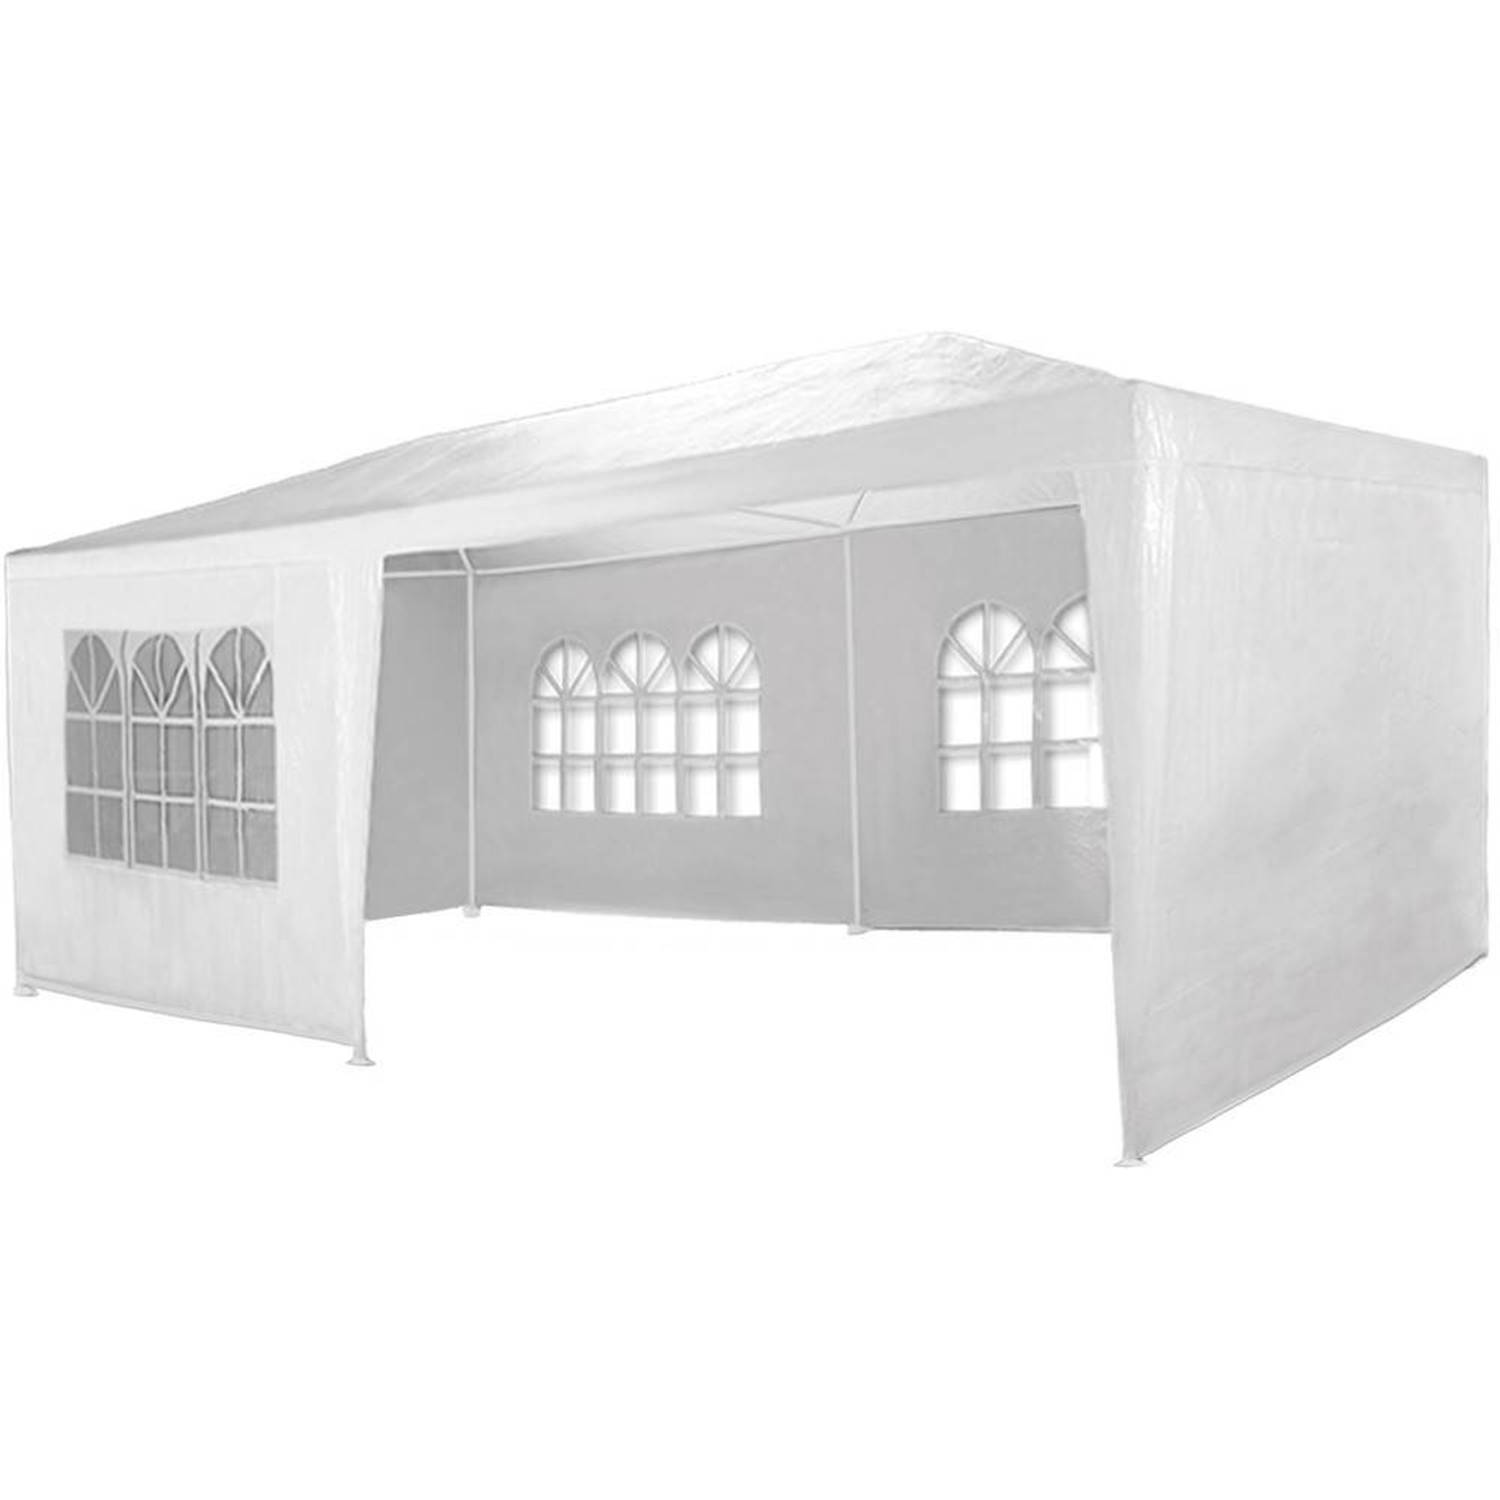 Garden Royal partytent 3x6m Wit